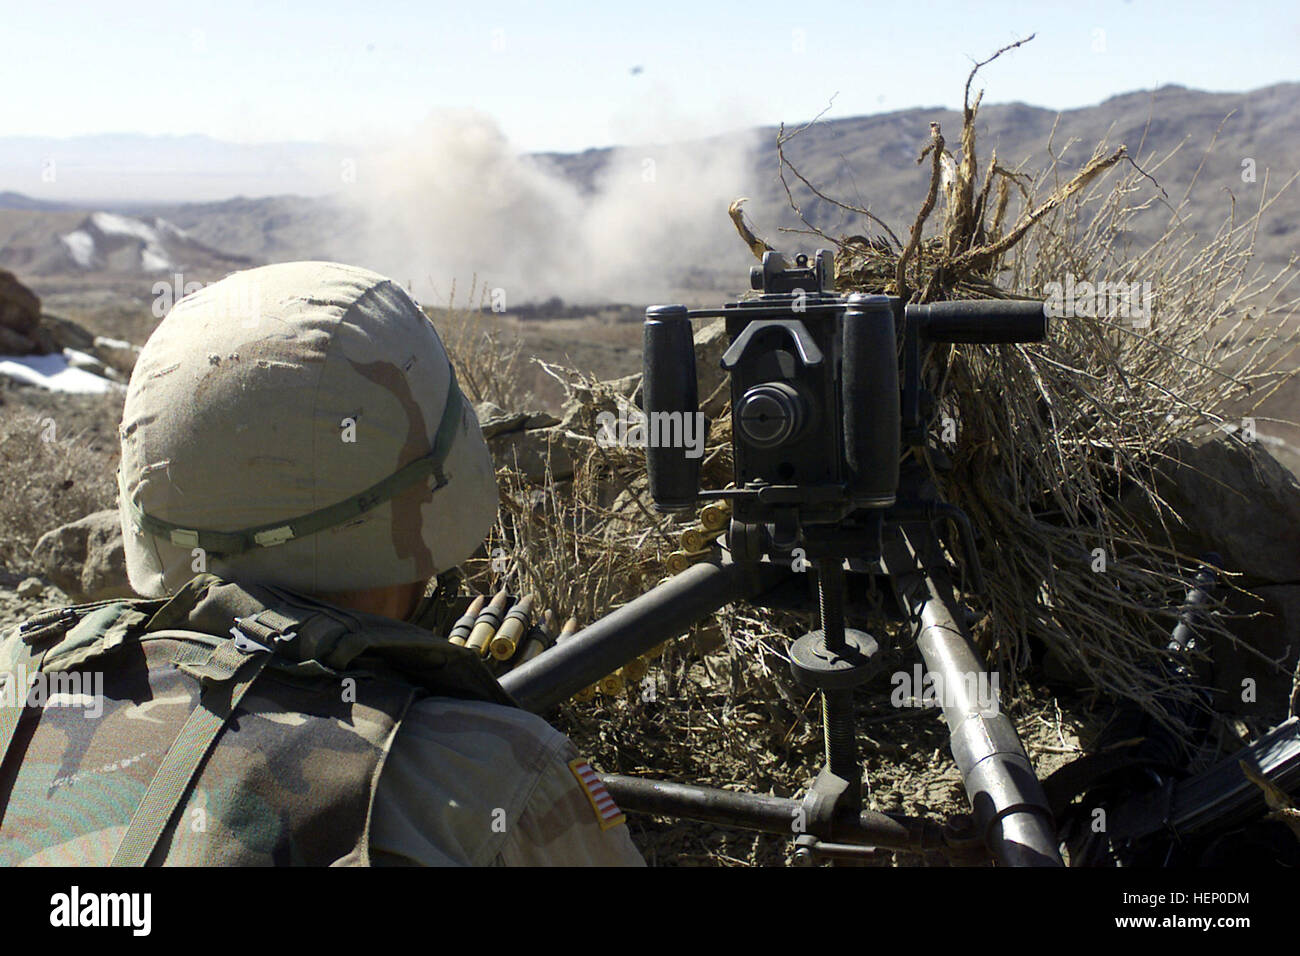 A U.S. Army Soldier with the 1st Battalion, 187th Infantry Regiment, 101st Airborne Division (Air Assault), mans a .50-caliber machine gun during a battle in Operation Anaconda, March 4, 2002. The battlefield is in eastern Afghanistan, south of Gardez in the Shah-e-kot mountain range. (U.S. Army photo/Spc. David Marck Jr.) Shah-e-kot Overwatch Stock Photo